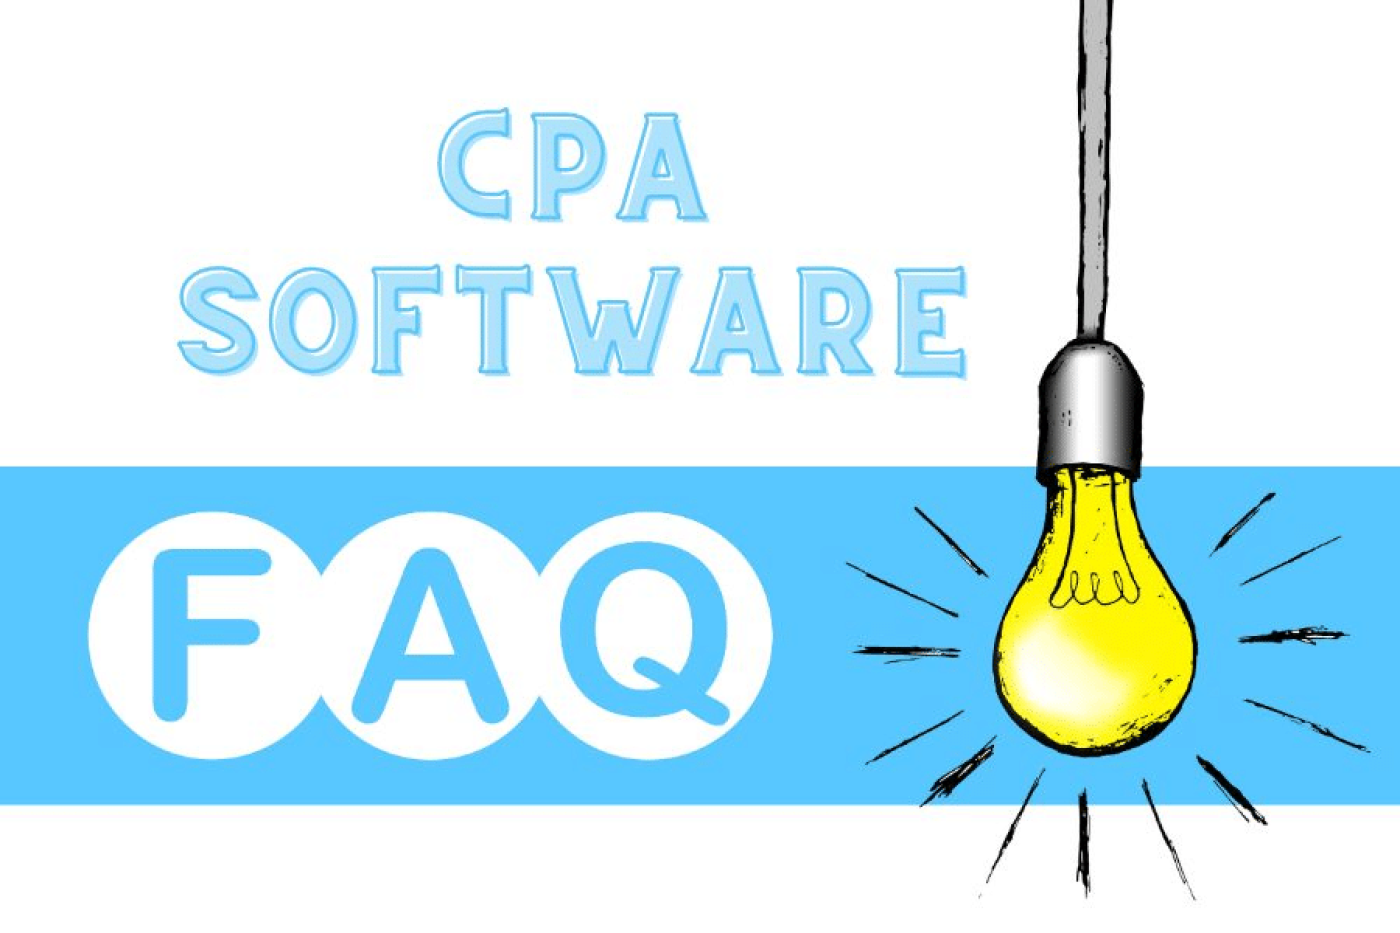 cpa software faqs and insights